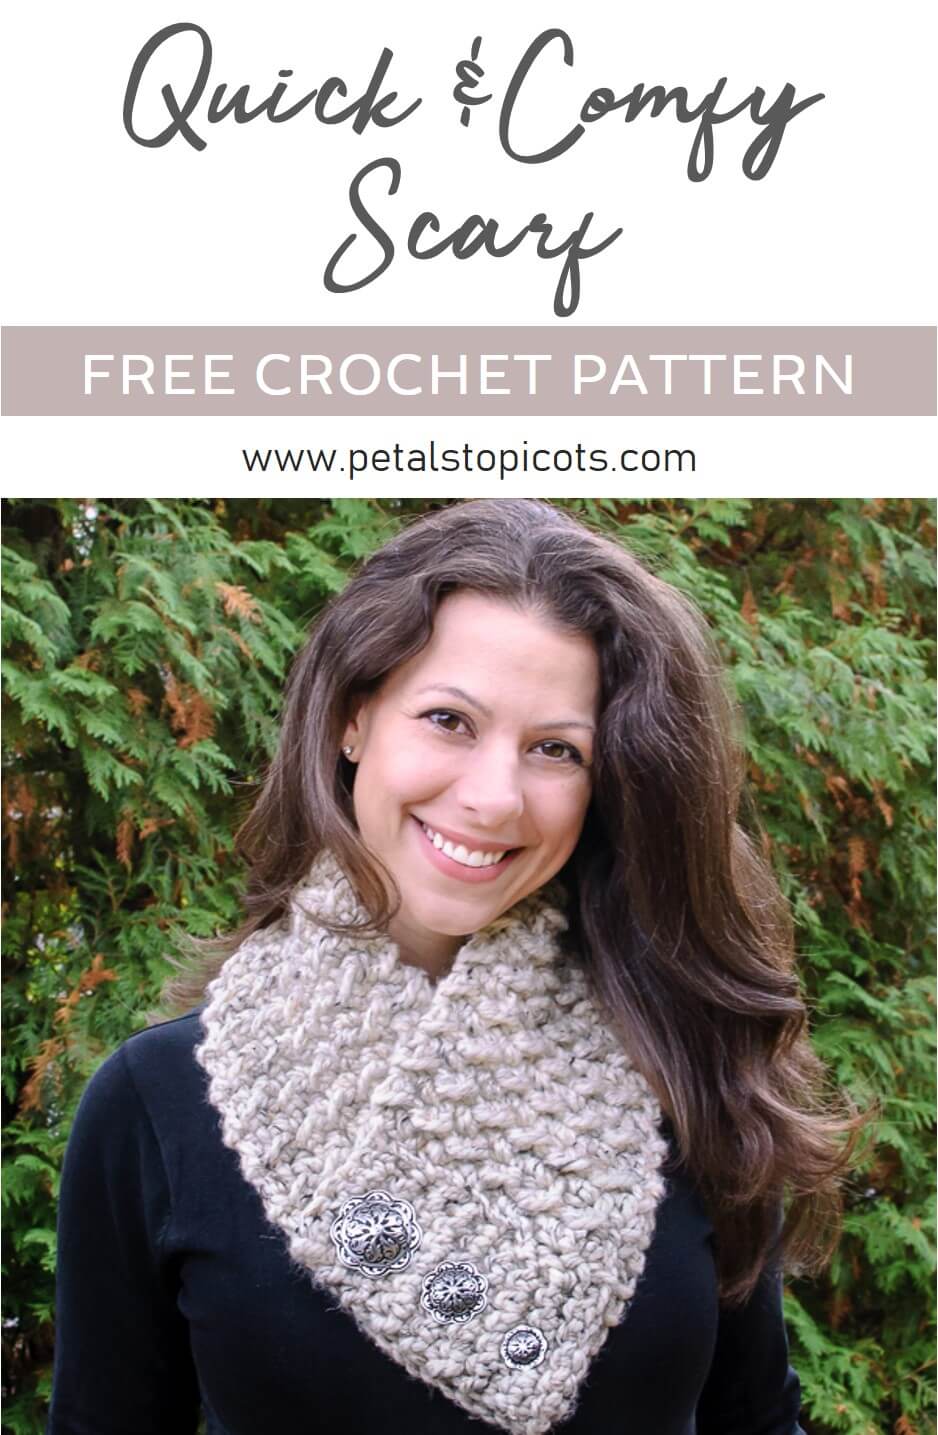 Quick and Comfy Crochet Scarf Pattern